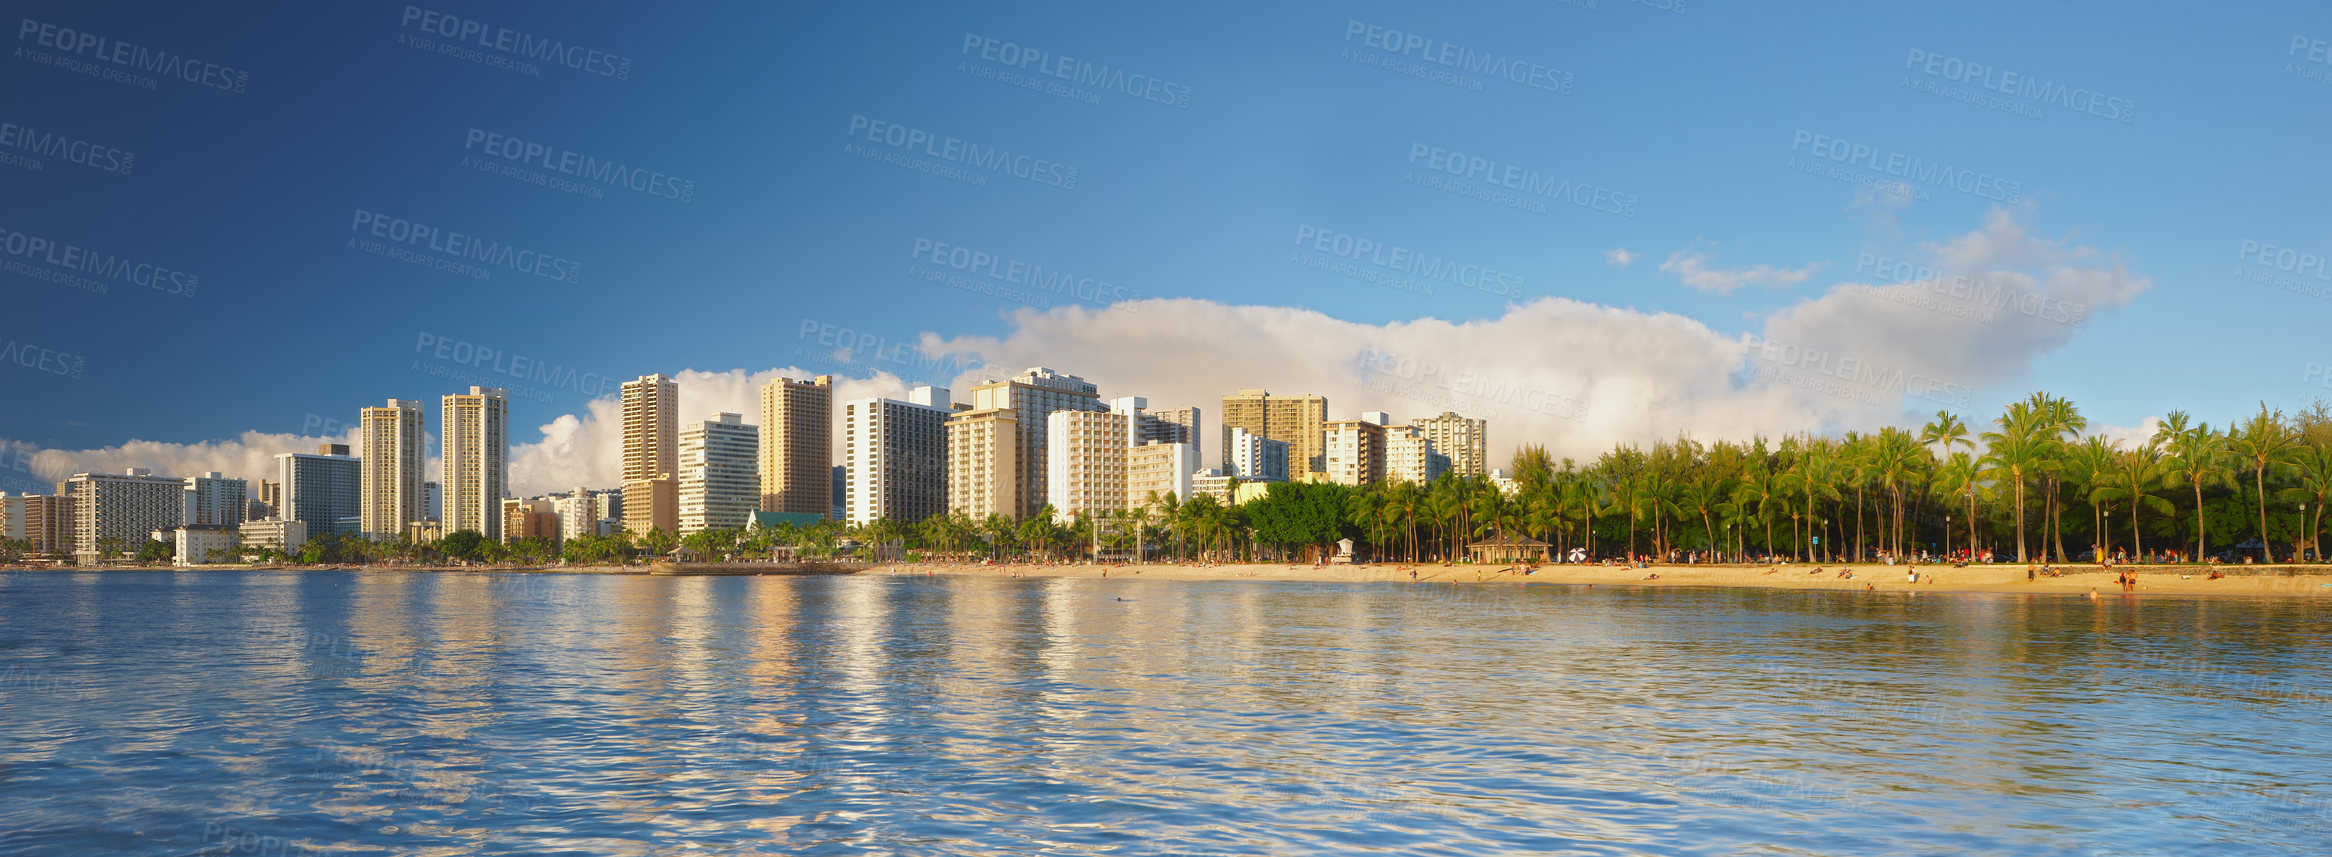 Buy stock photo Ocean, city and buildings with landscape panorama, travel destination with skyscraper and outdoor. Urban development, architecture and environment for tourism, adventure and location with blue sky